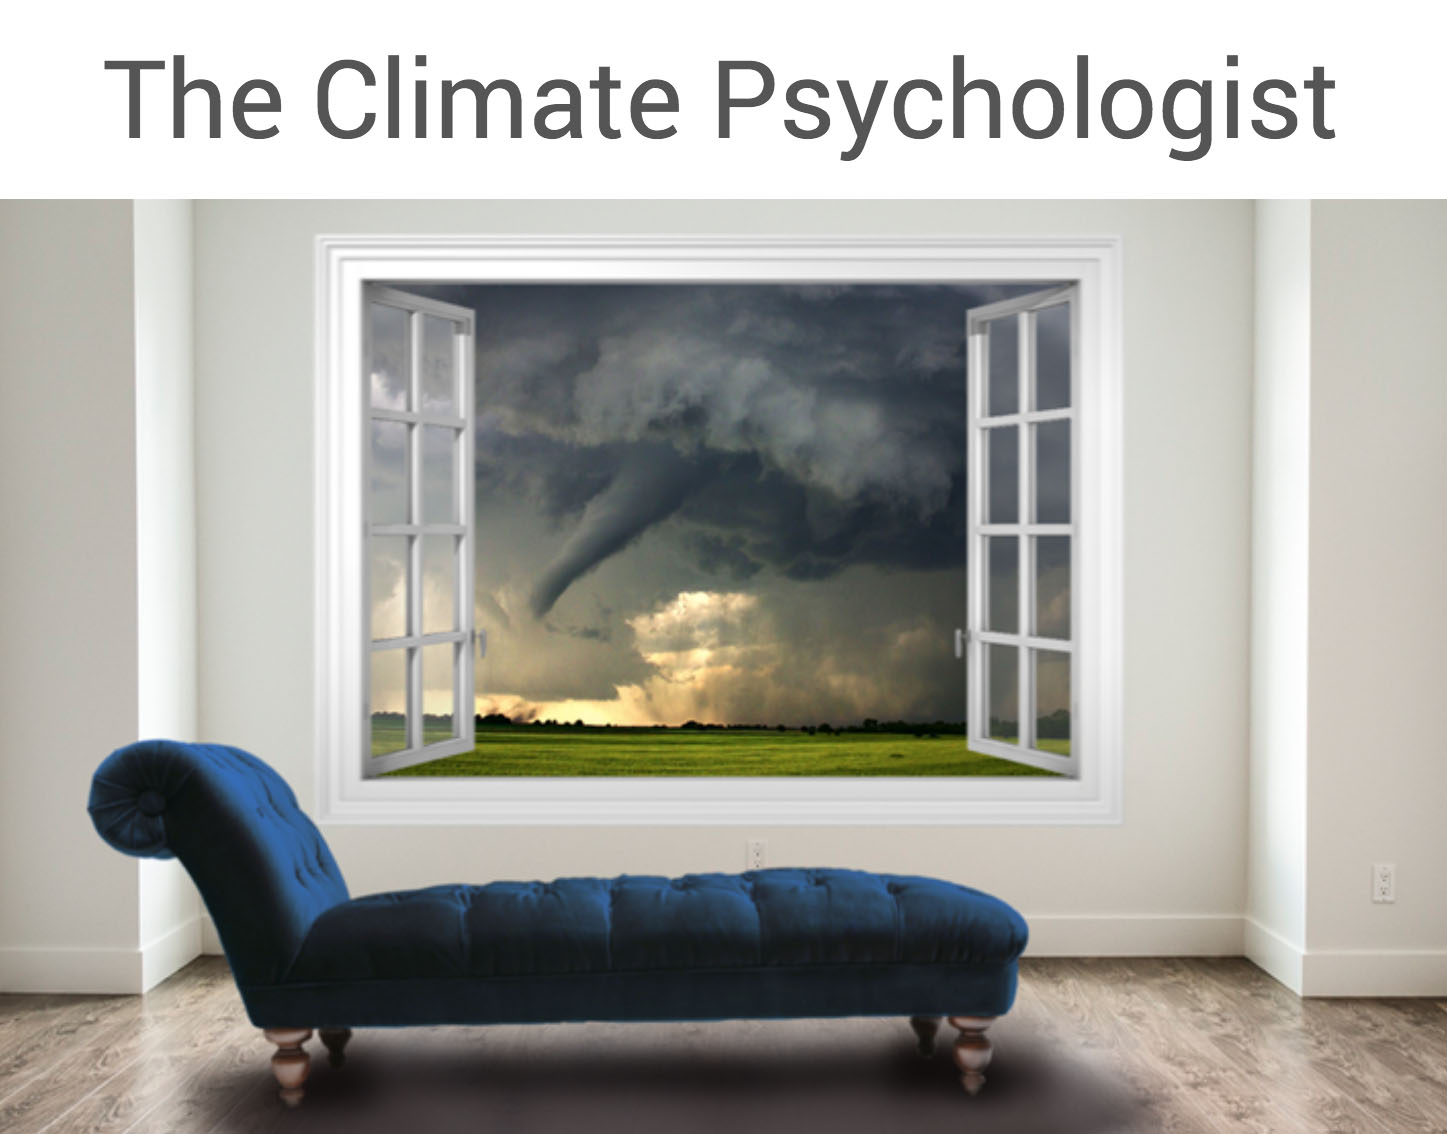 The Climate Psychologist